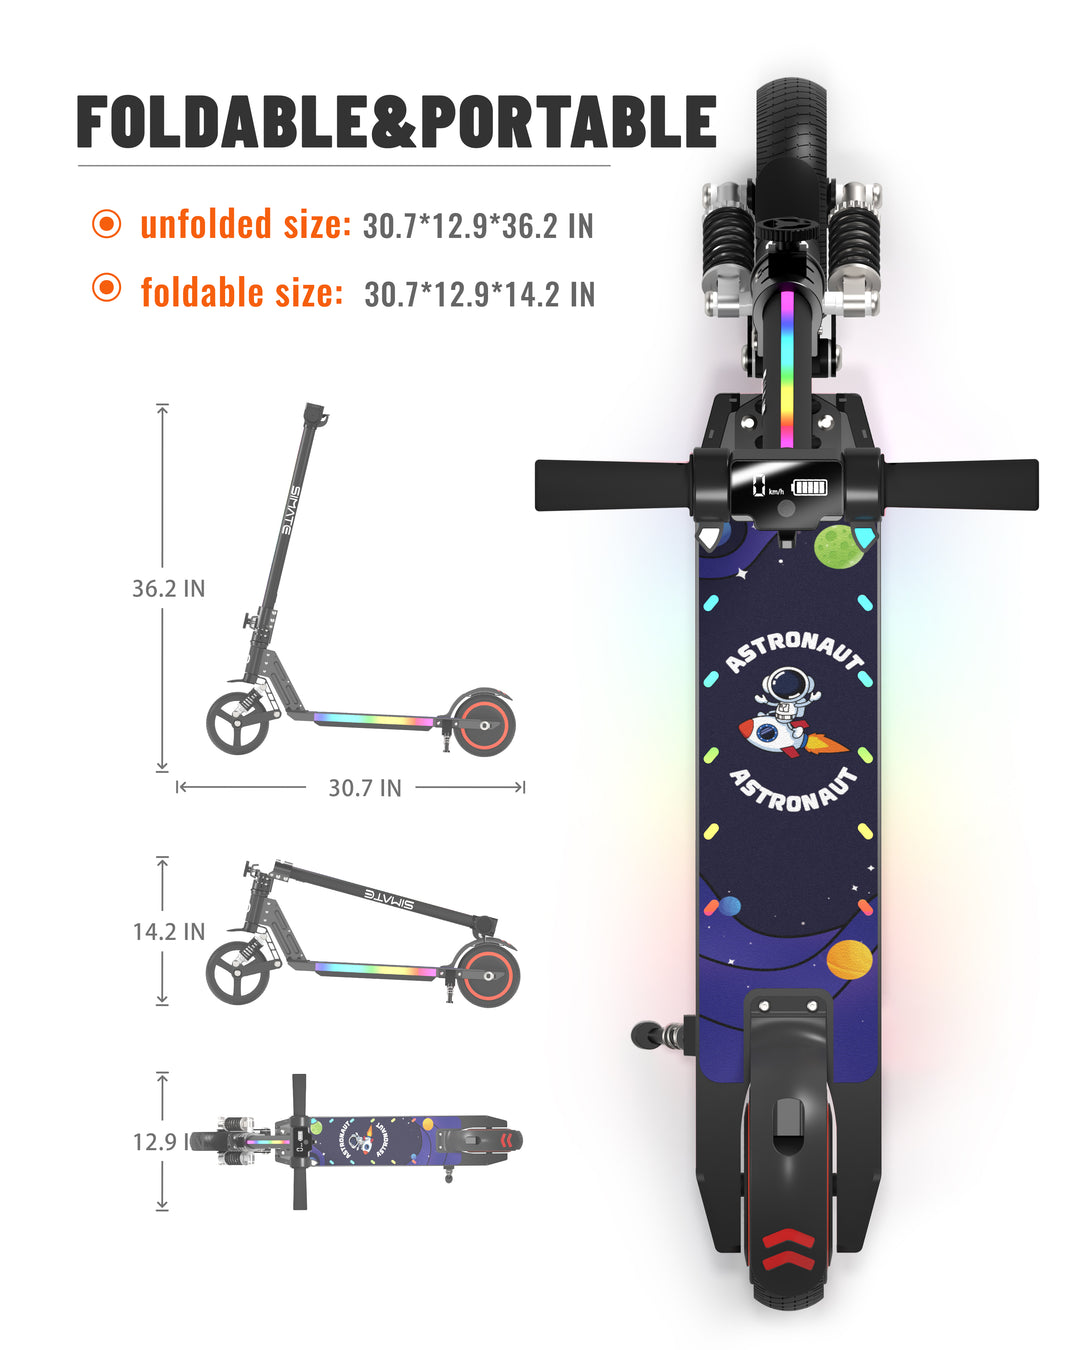 S5 Colorful Headlight Electric Scooter for Kids | Black